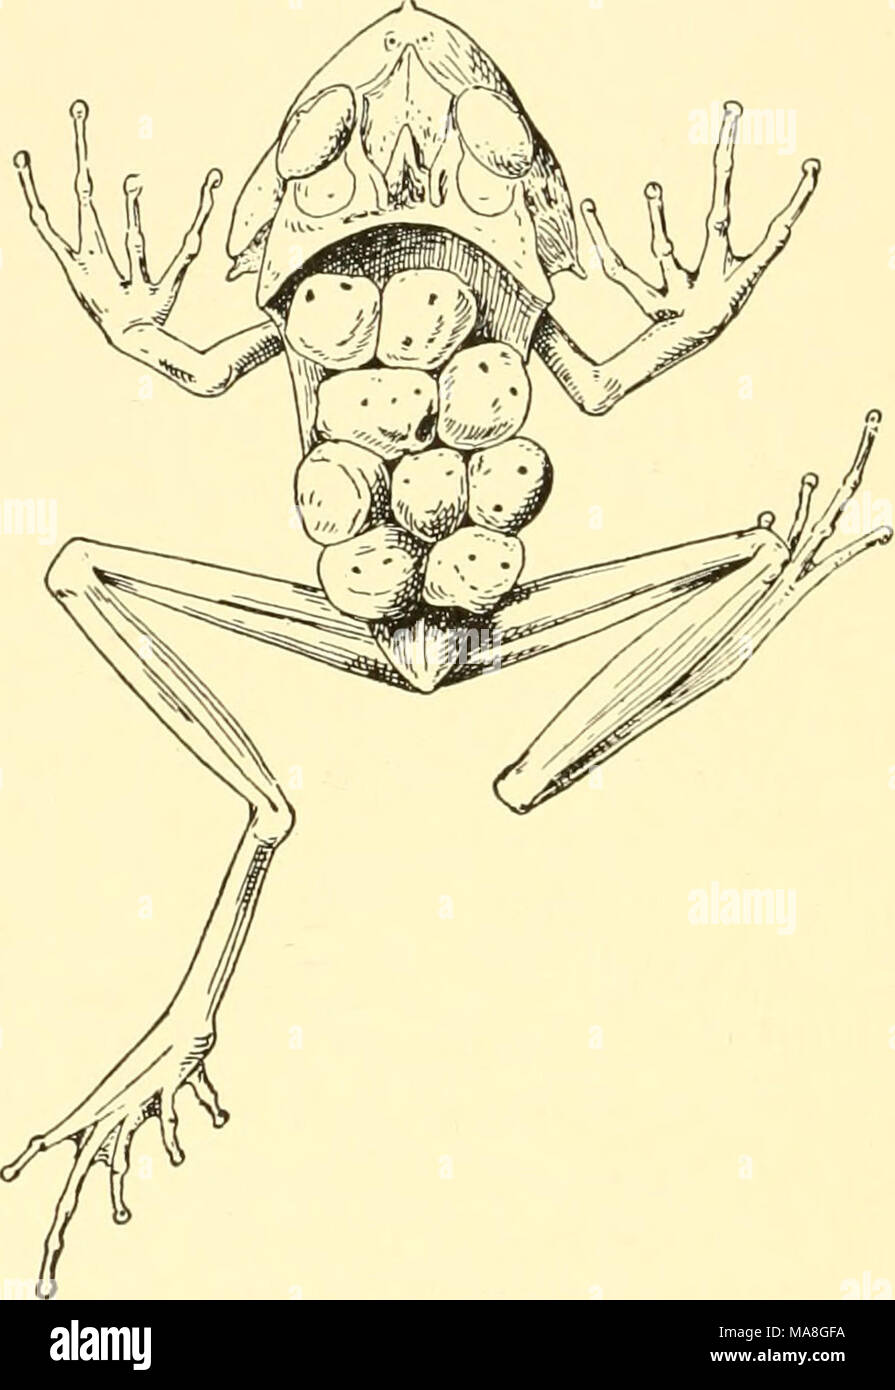 . Ecological animal geography; an authorized, rewritten edition based on Tiergeographie auf ockologischer grundlage . Fig. 118.—Female of the tropical American frog Cerathyla bubalus, carrying eggs attached to her back. After Boulenger. hatching. Frogs of the genus Eleutherodactylus, with some hundred species in tropical America, glue their large eggs to a leaf, place them in the axils of leaves, or conceal them beneath stones. The young go through a curtailed metamorphosis in the egg and hatch in adult form. Still others carry their eggs about until the young emerge as adults (Fig. 118).40 Ma Stock Photo